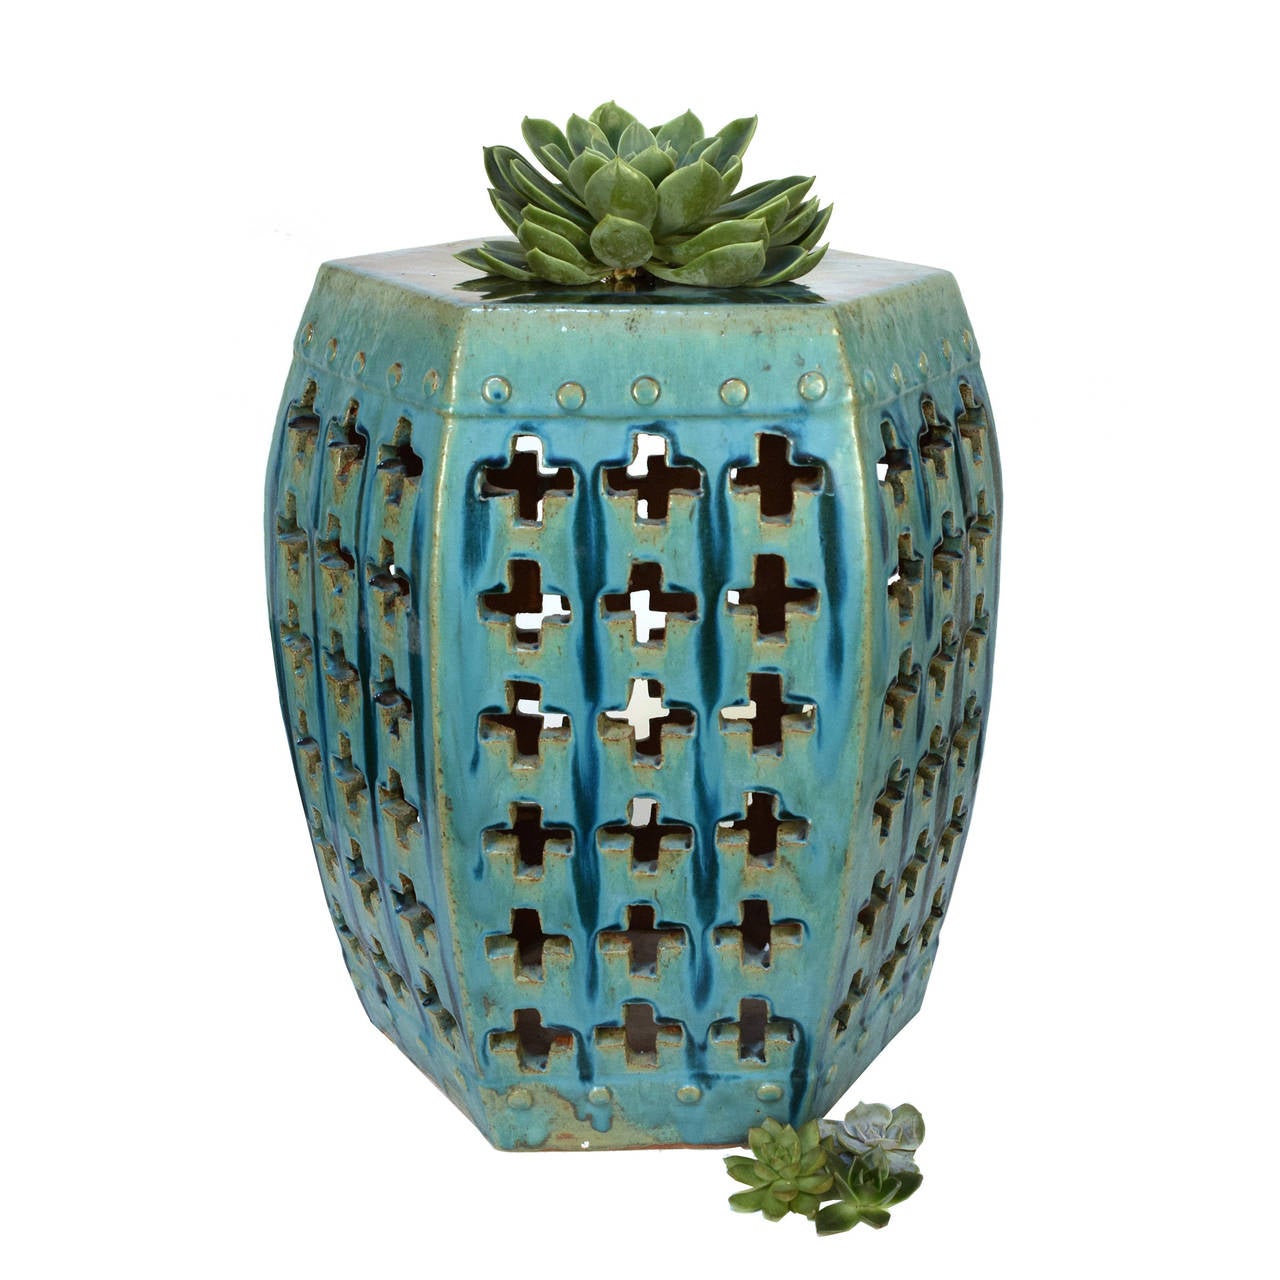 A green glazed garden stool from Beijing, China with a modern geometric pattern.

 